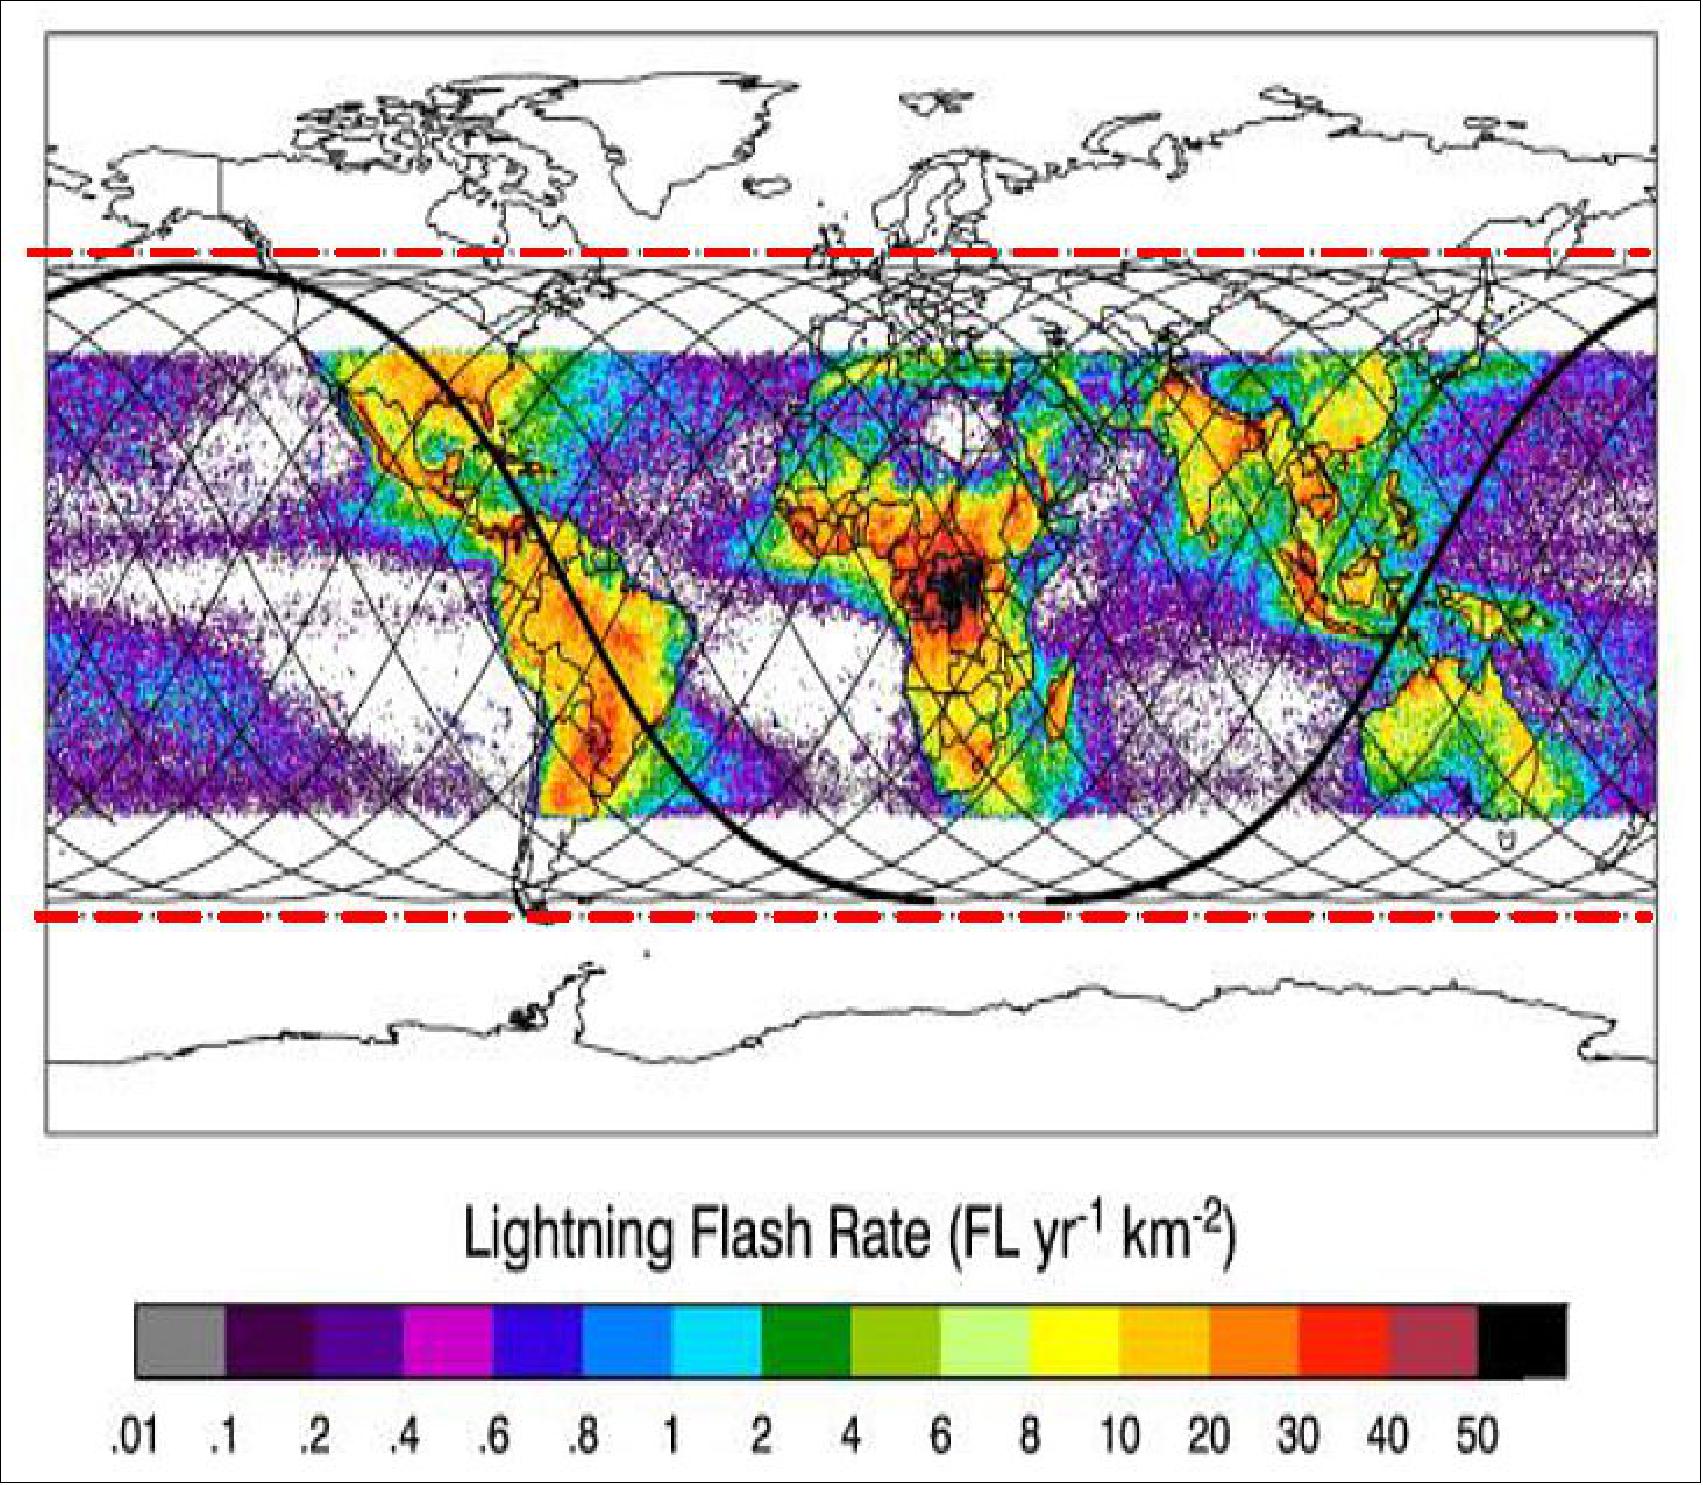 Figure 5: The maximum ISS latitude coverage of ±54.33º represents 81% of the Earth’s surface, but includes 98% of the global lightning on an annual basis (image credit: NASA/MSFC)